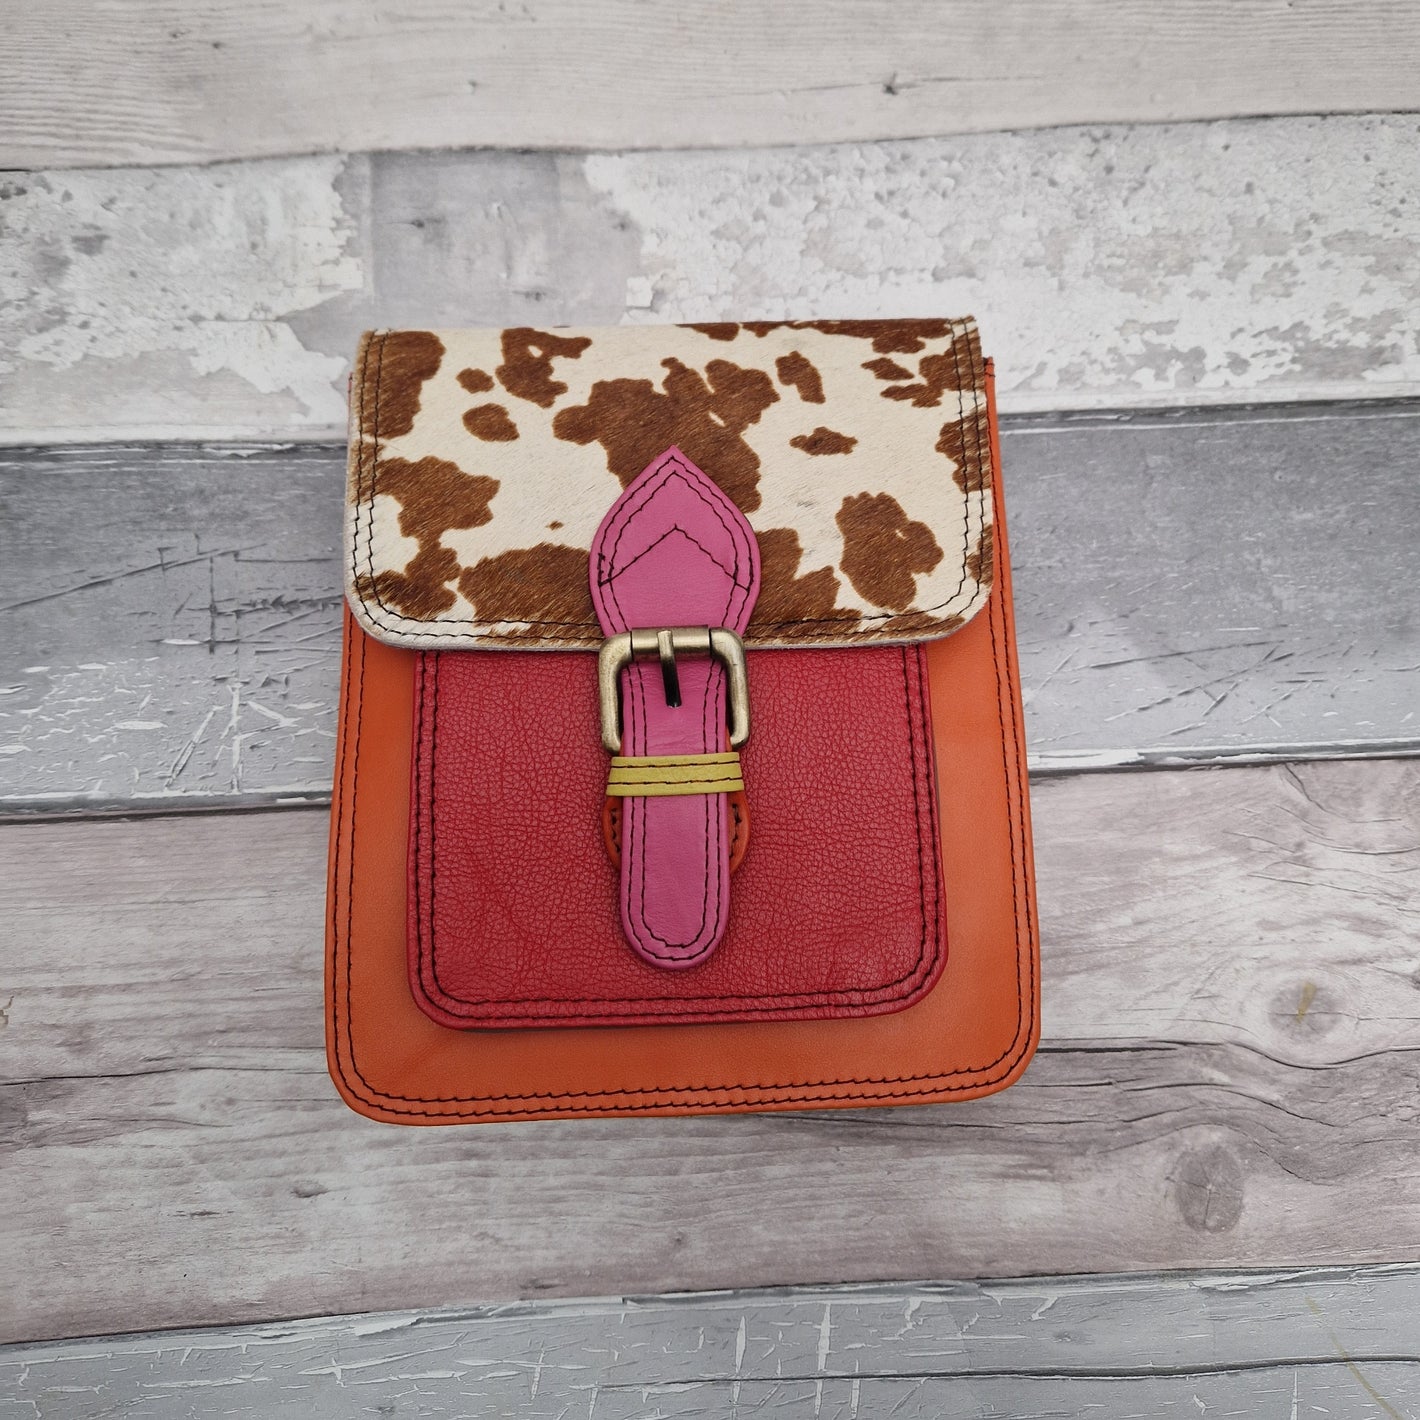 Orange leather messenger style bag decorated with a panel in textured cow hide.